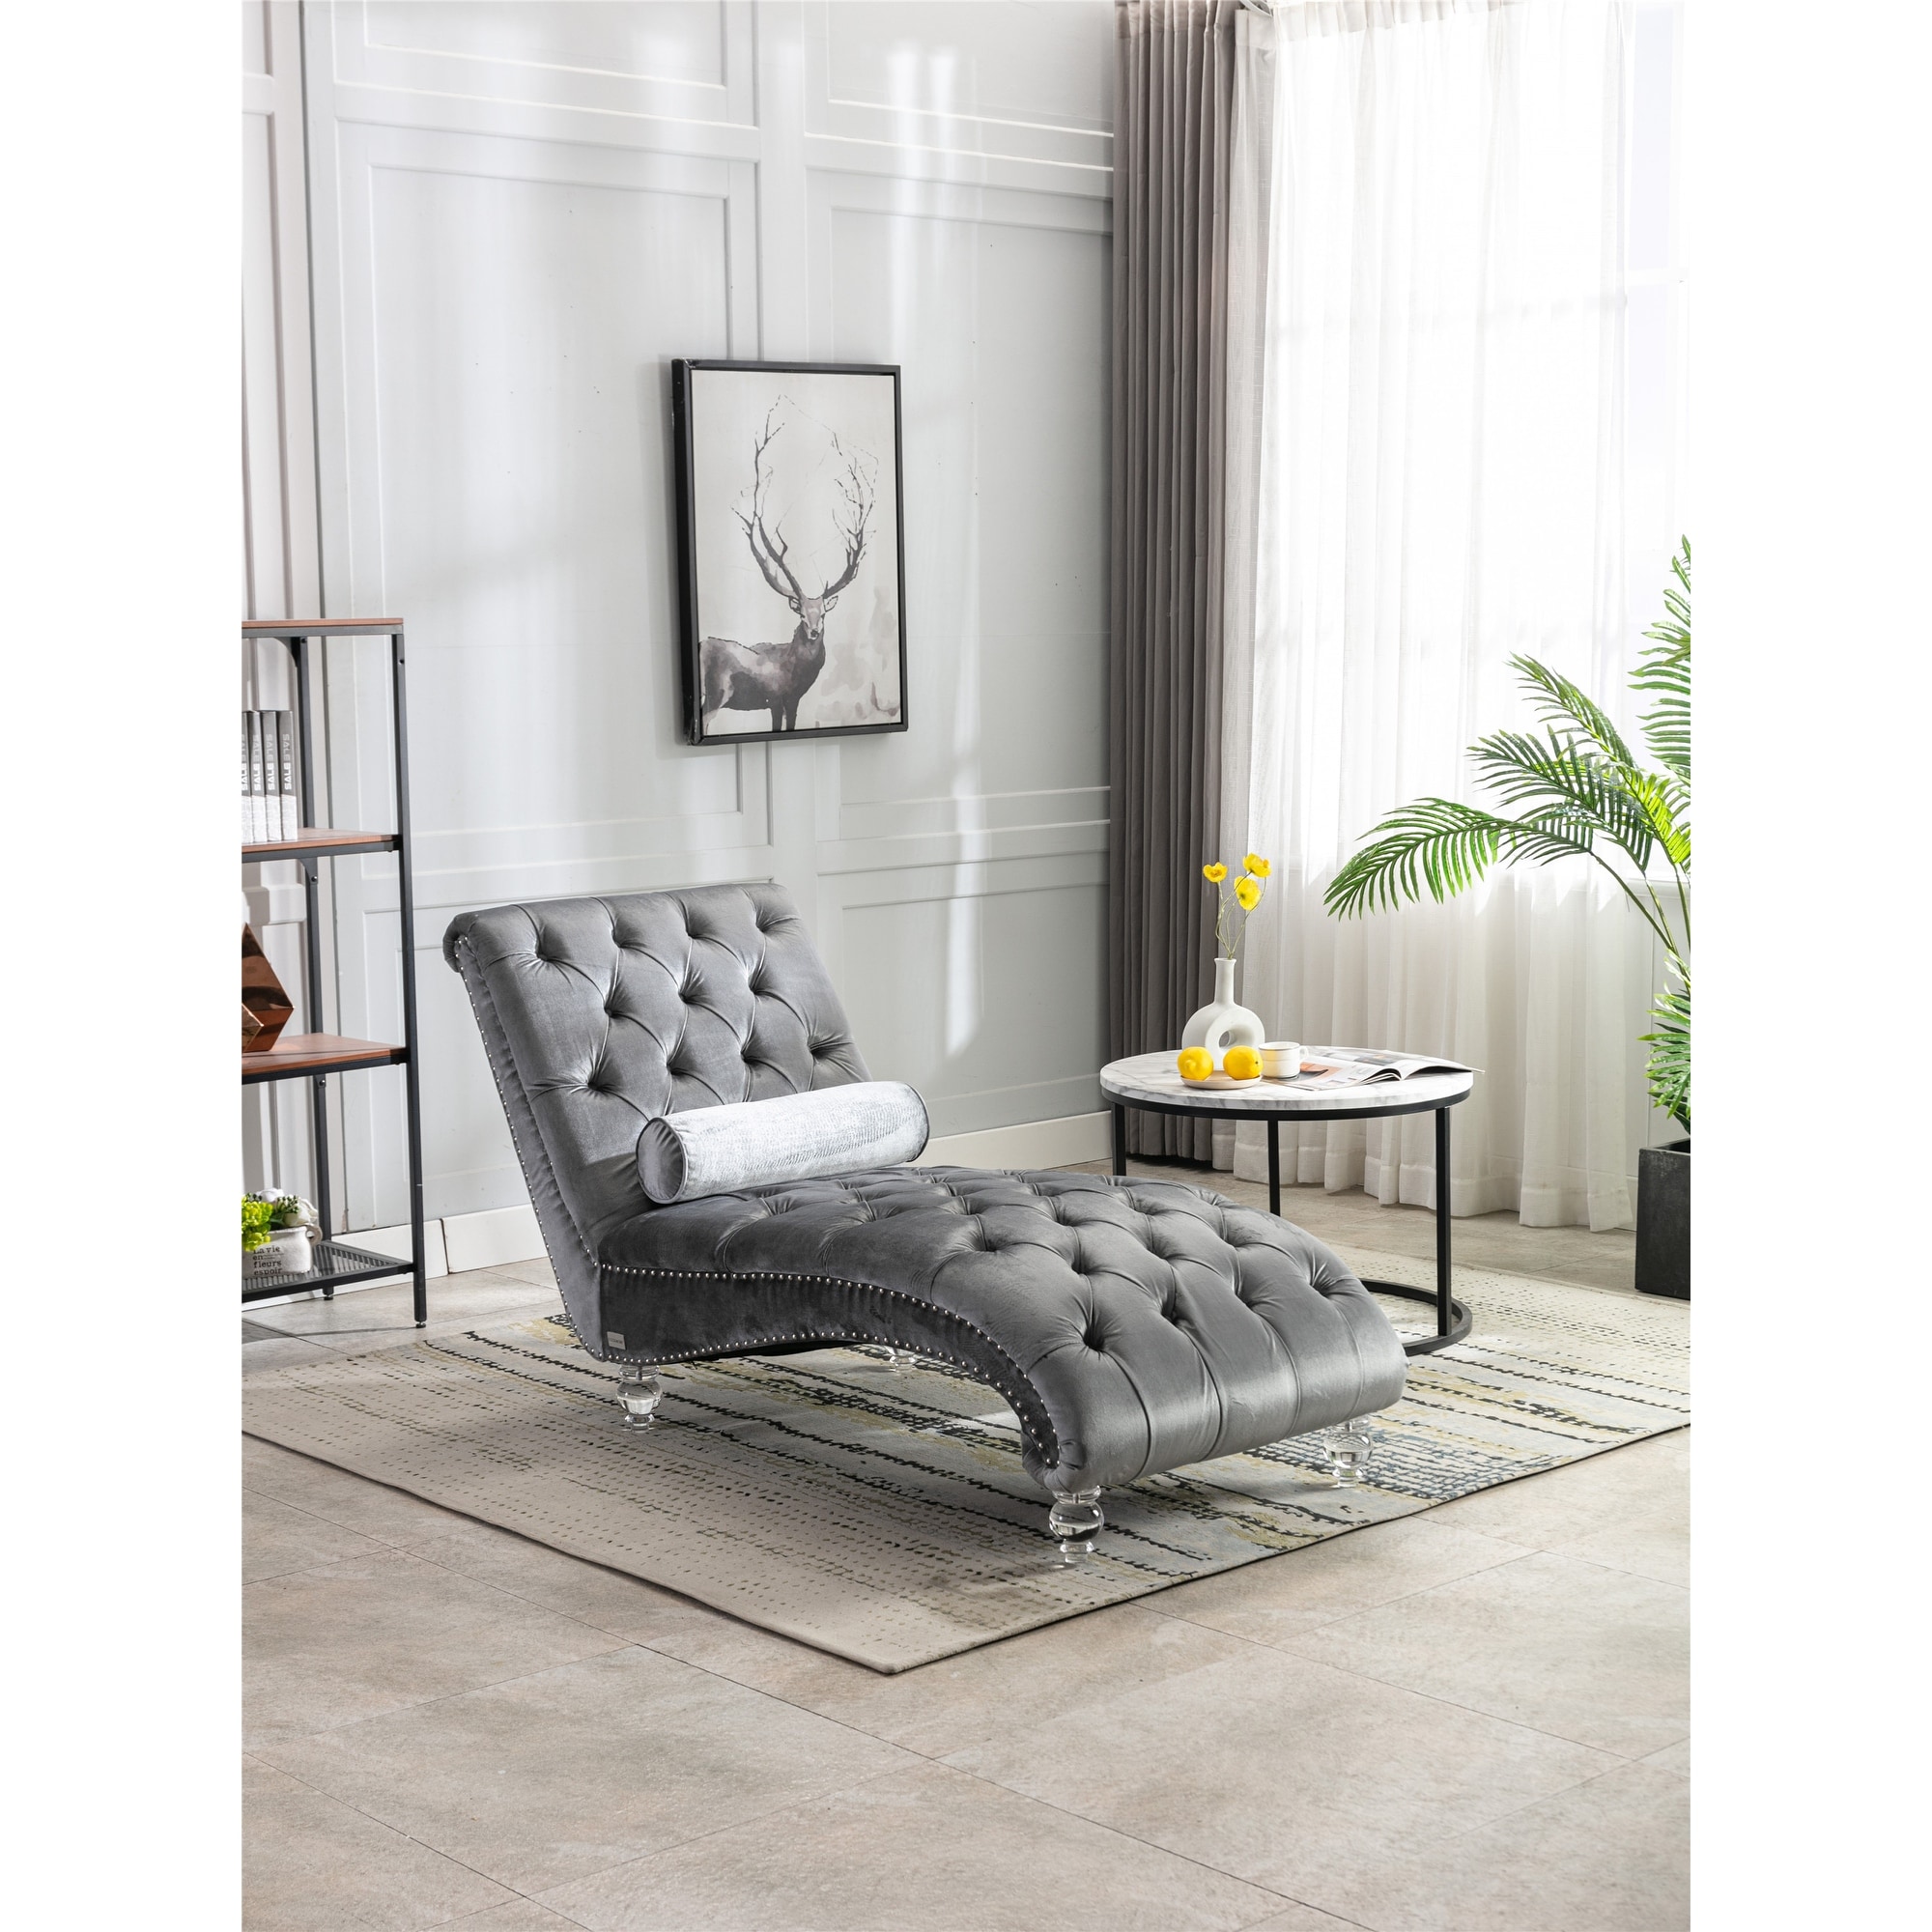 Velvet Chaise Lounge Indoor Chair, Leisure Long Lounger Concubine